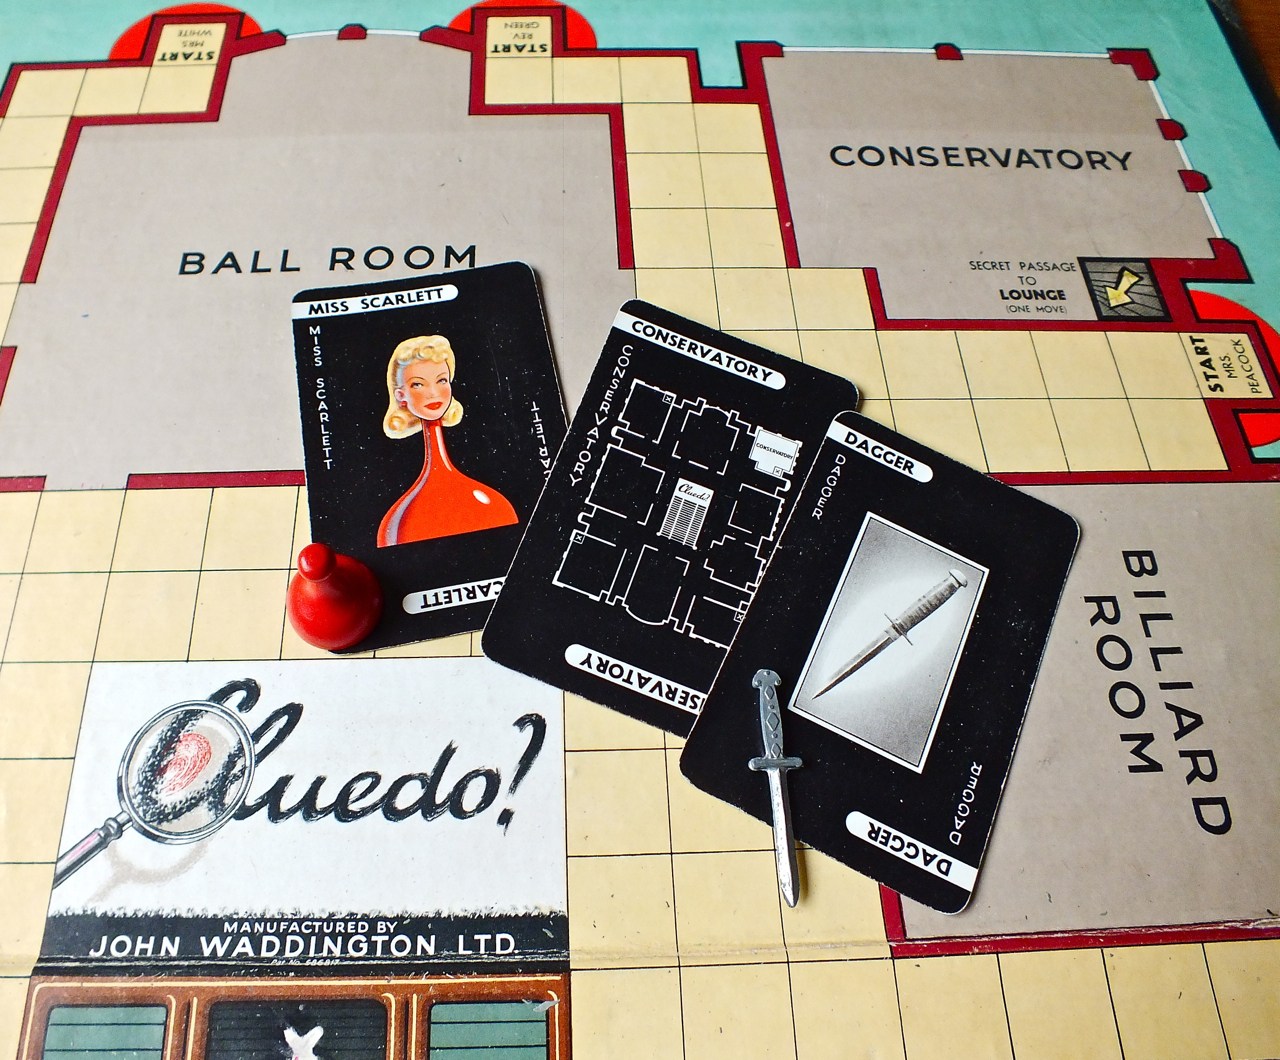 Cluedo, 1949, Waddingtons, first edition; Miss Scarlett in the Conservatory with the Dagger